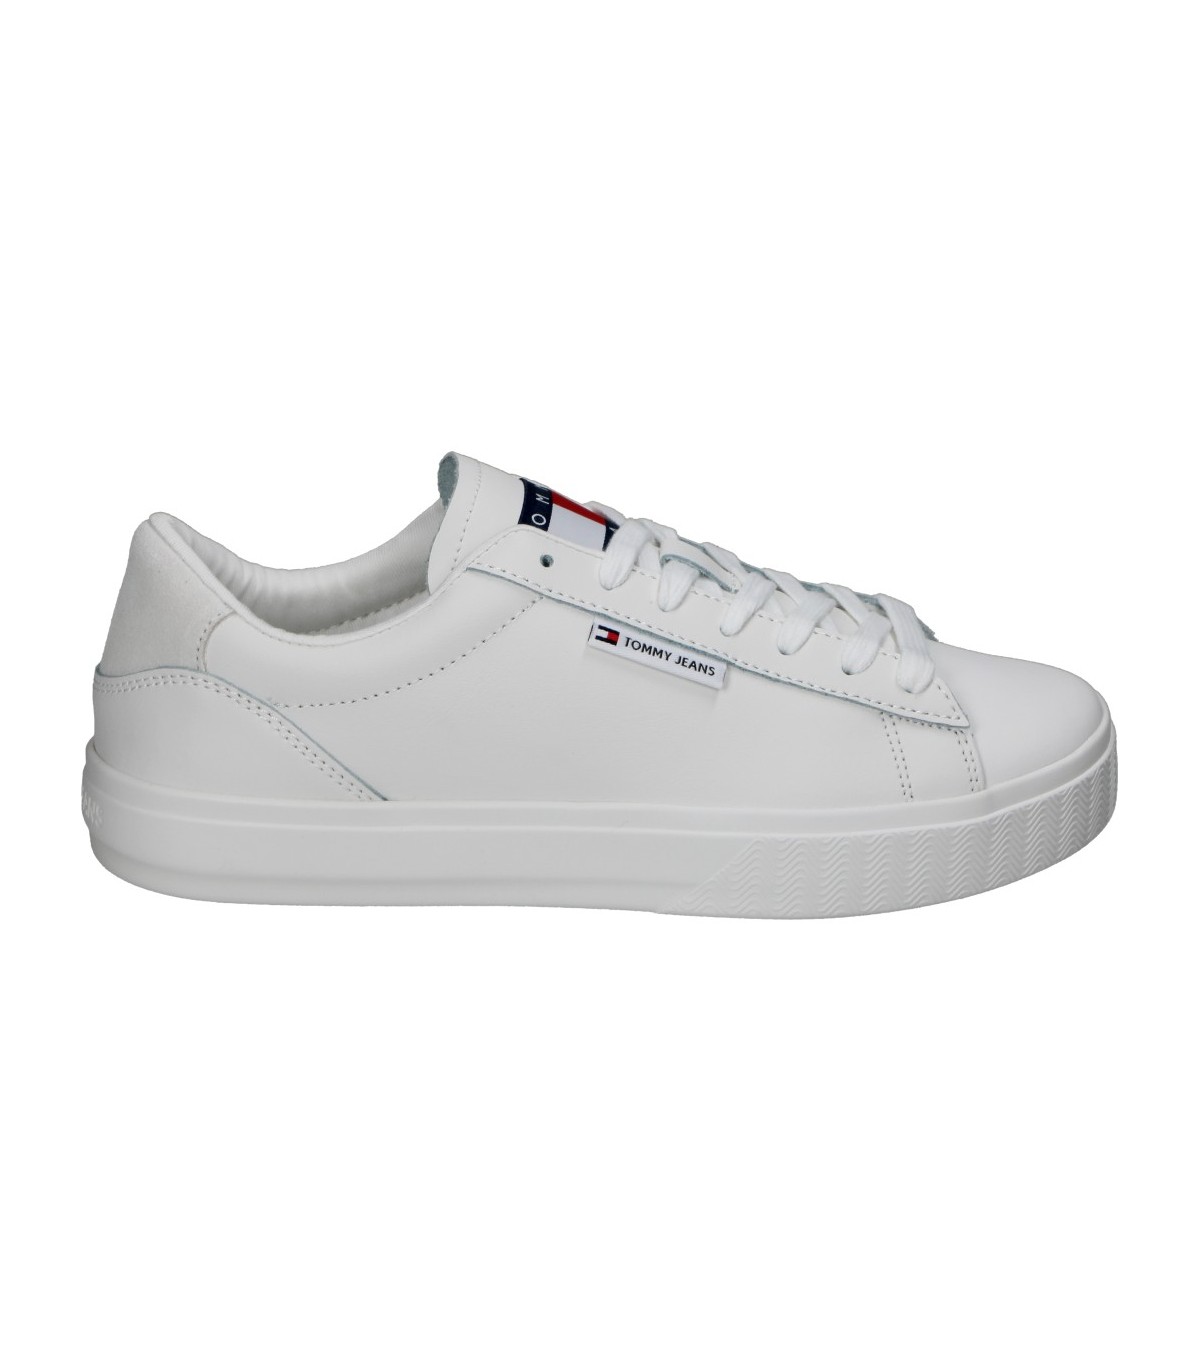 Tommy Jeans - Zapatillas Para Mujer Blancas - Cool Tommy Jeans Sneaker